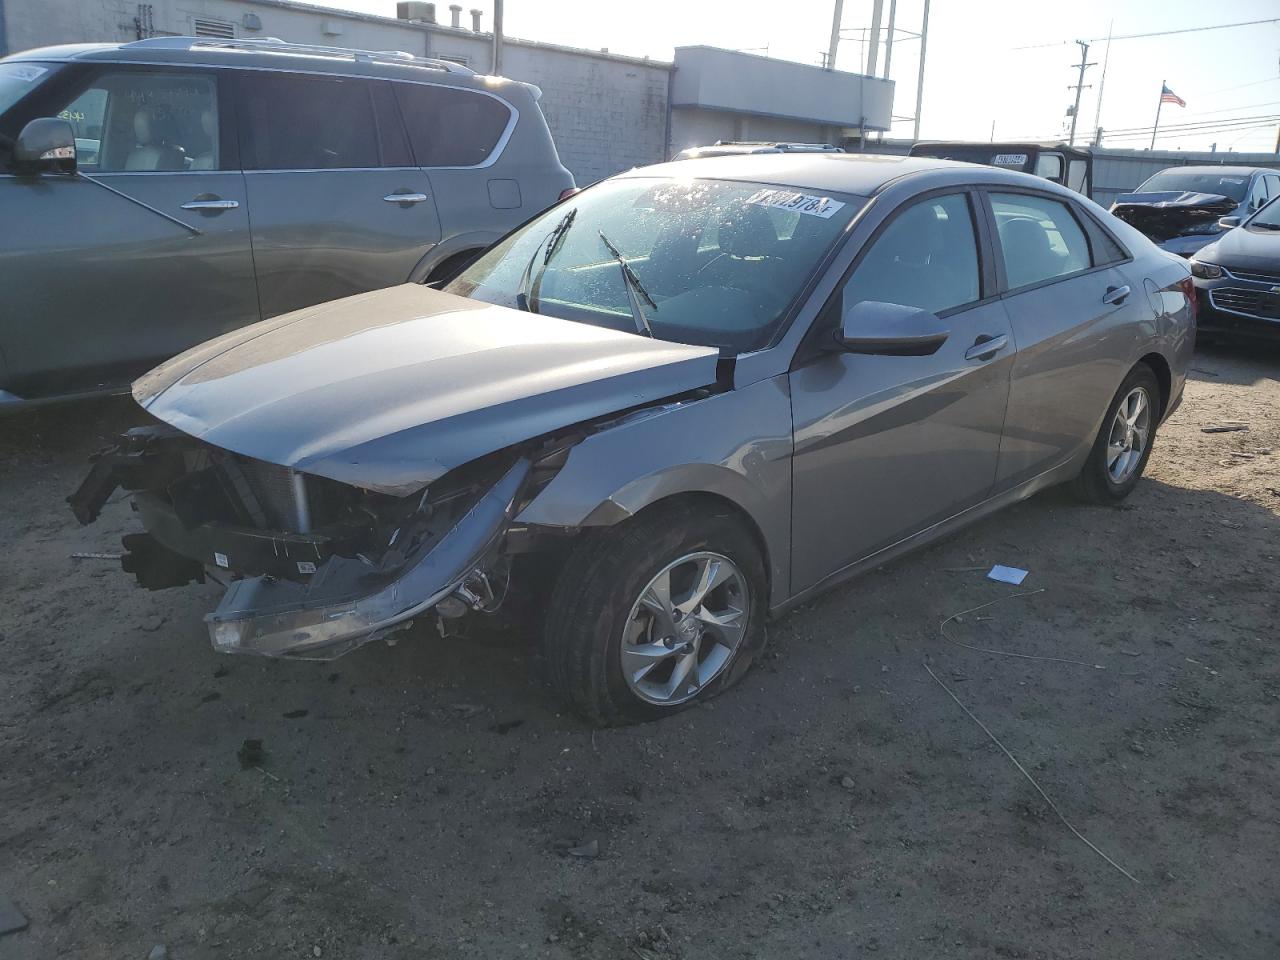 vin: KMHLL4AG2PU605921 KMHLL4AG2PU605921 2023 hyundai elantra 2000 for Sale in 60411 5546, Il - Chicago South, Chicago Heights, Illinois, USA